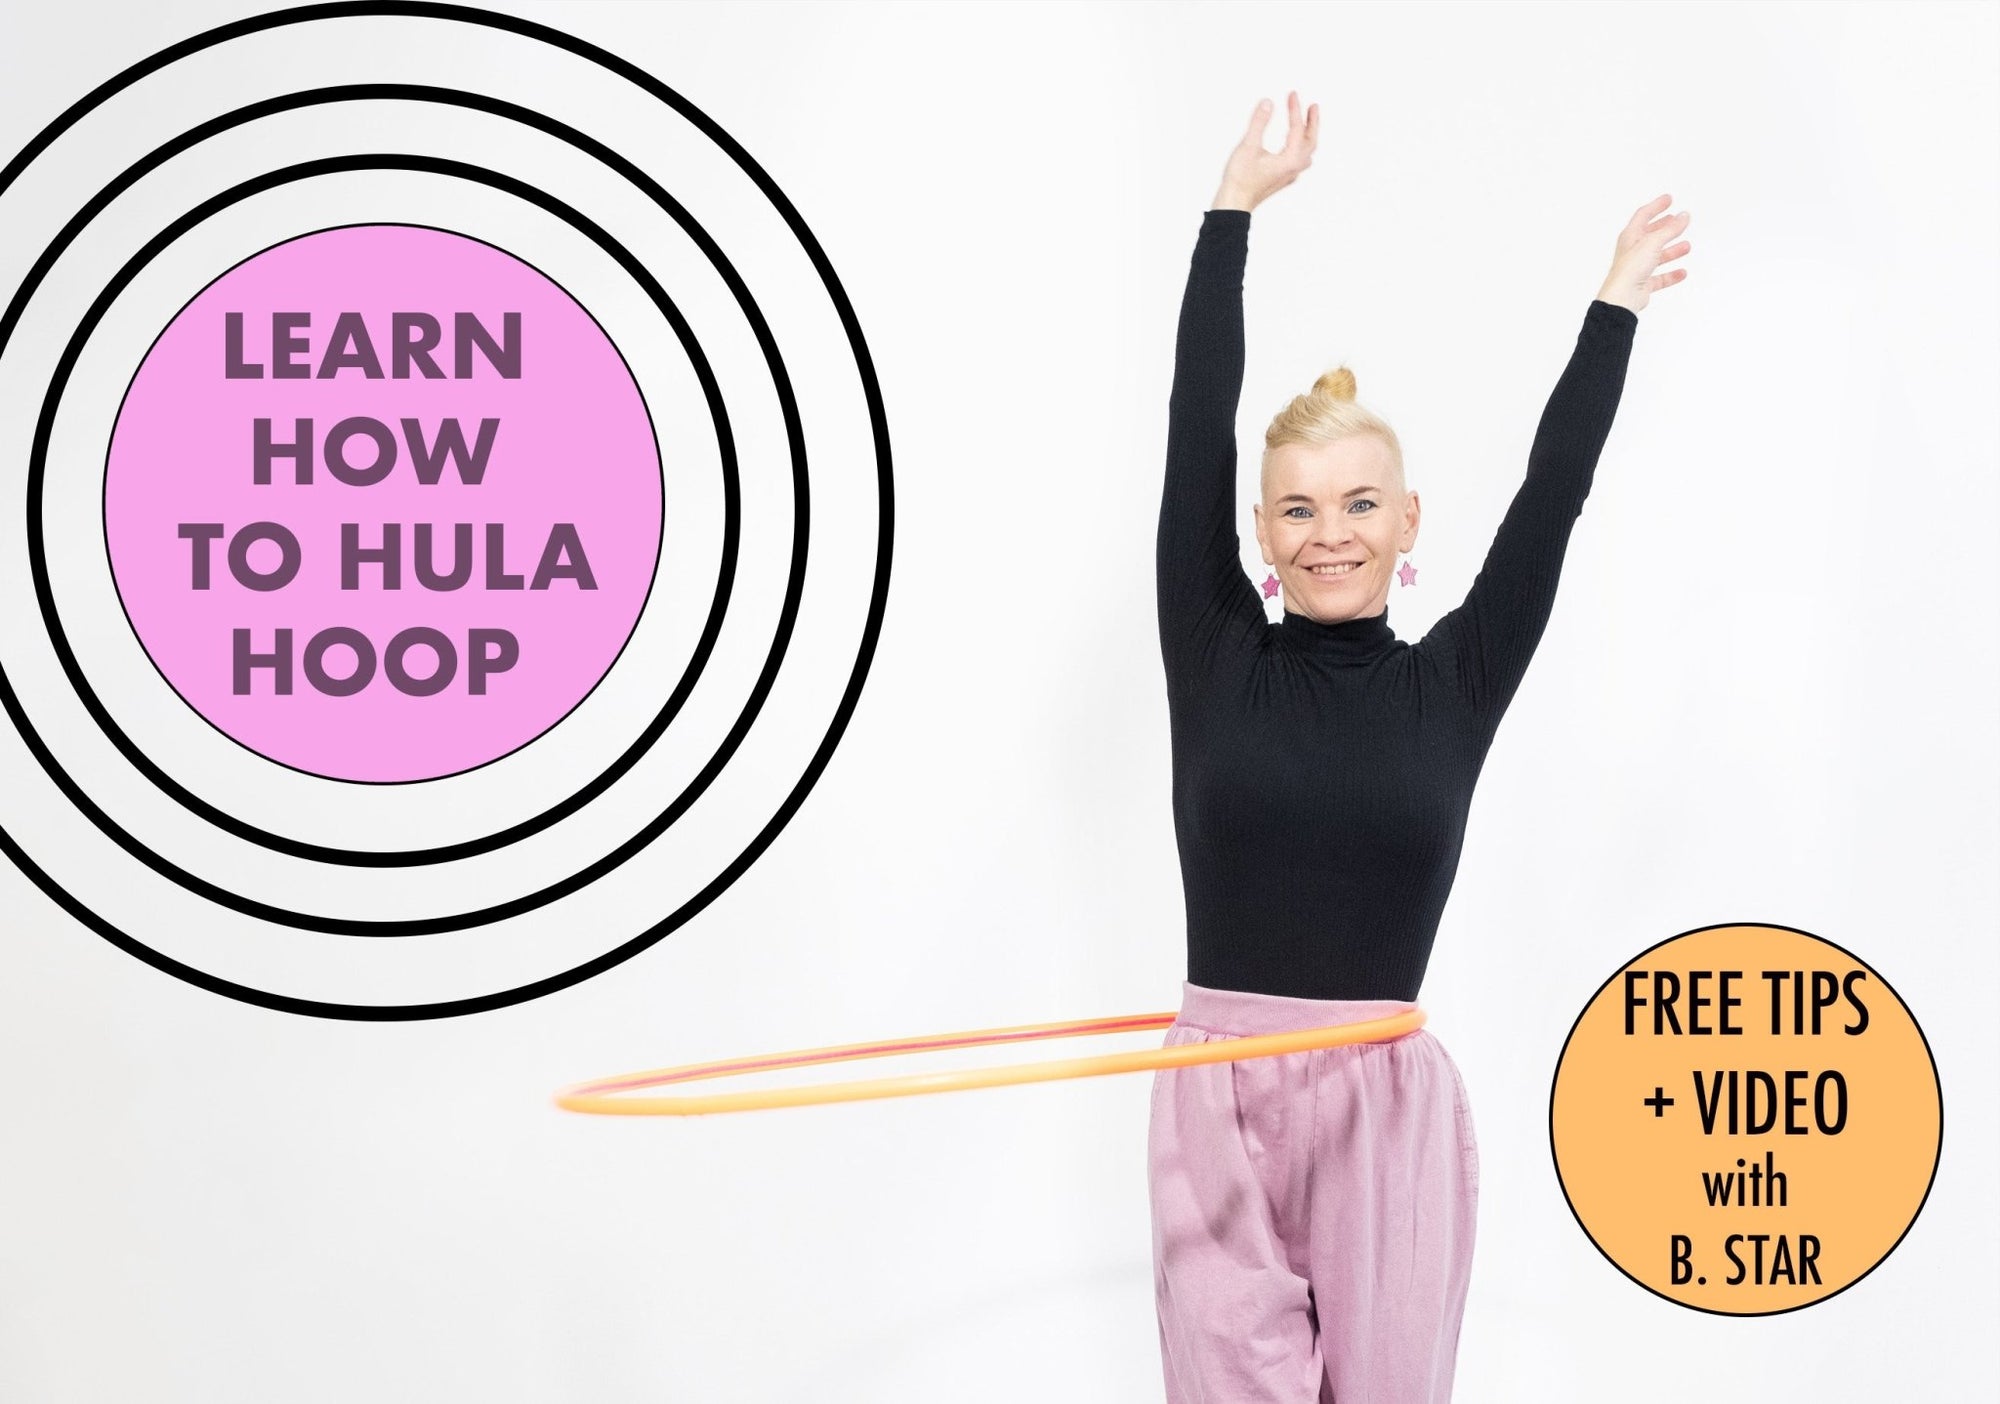 How to Hula Hoop in 3 Easy Steps + Free Video Lesson - Hoop Empire